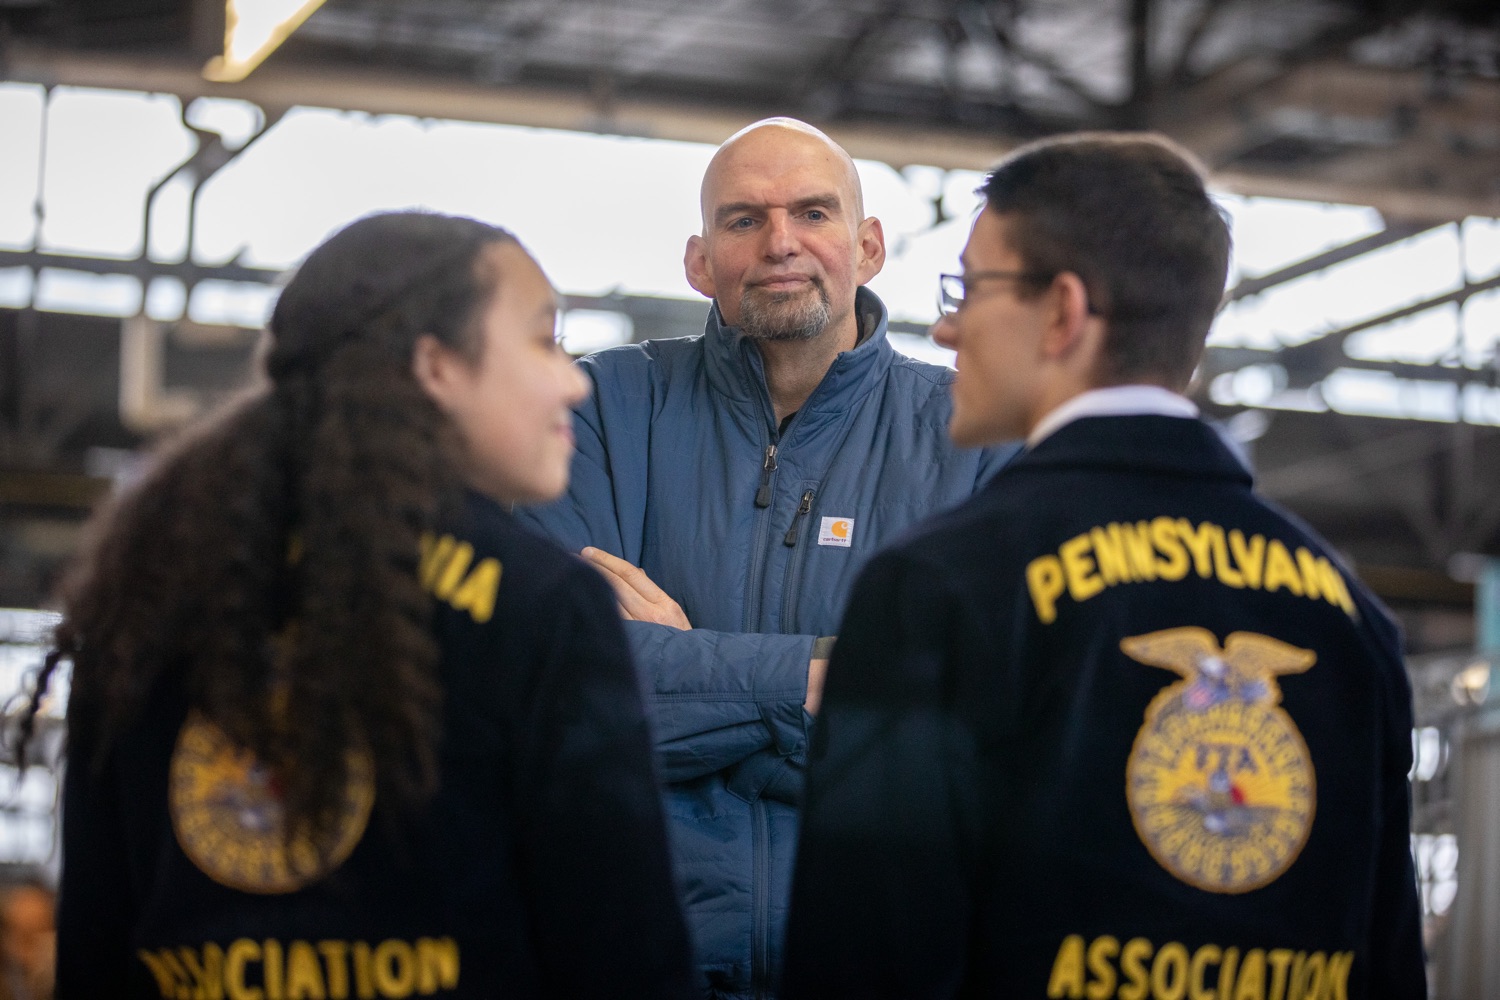 Lt. Governor John Fetterman speaking to Pennsylvania FFA members.  Lt. Governor John Fetterman and Secretary of Agriculture Russell Redding today unveiled the 2020 Pennsylvania Farm Show butter sculpture, carved from a half-ton of butter depicting three of Pennsylvanias beloved professional sports mascots: Philadelphia Flyers Gritty, Philadelphia Eagles Swoop, and Pittsburgh Steelers Steely McBeam celebrating with a spread of Pennsylvania dairy products. The sculpture, a long-time Farm Show staple, encourages Pennsylvanians to be a fan of Pennsylvania dairy and give a cheer to the more than 6,200 dairy farmers in the commonwealth.  Harrisburg, PA  January 2, 2020<br><a href="https://filesource.amperwave.net/commonwealthofpa/photo/17646_agric_butter_sculpture_dz_013.jpg" target="_blank">⇣ Download Photo</a>